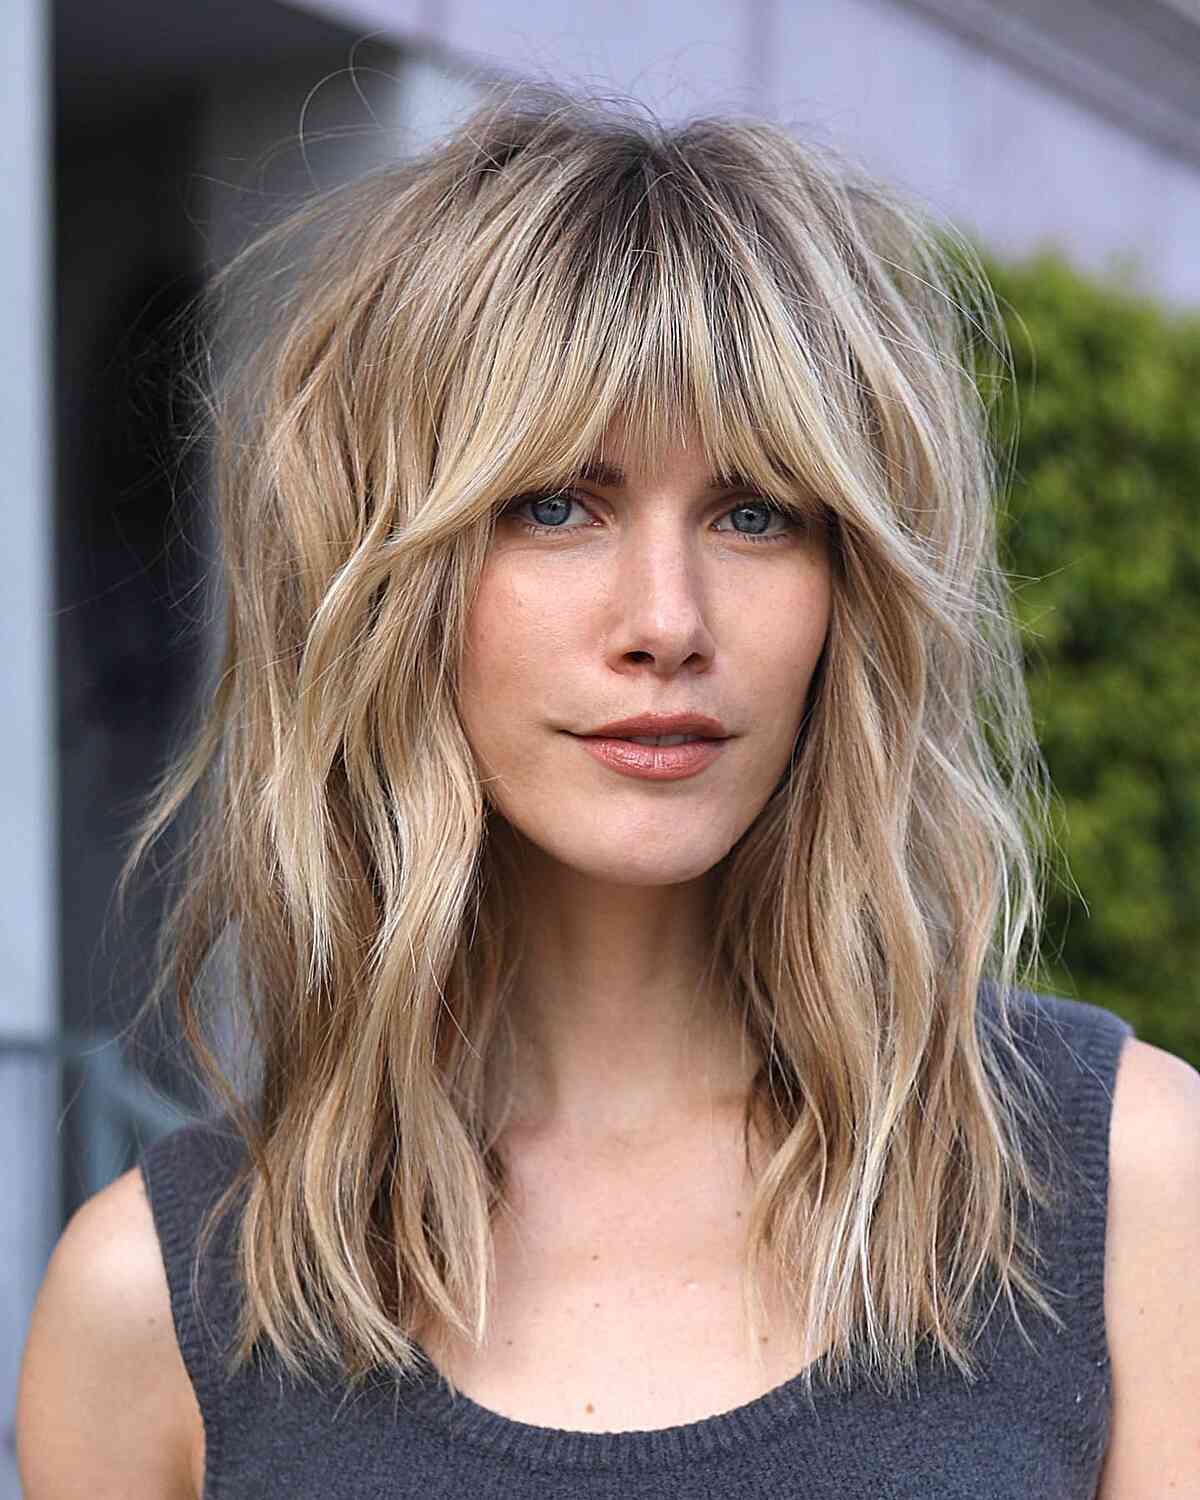 Thick Shaggy Cut with Bangs Different Hairstyles for women with mid-length wavy hair